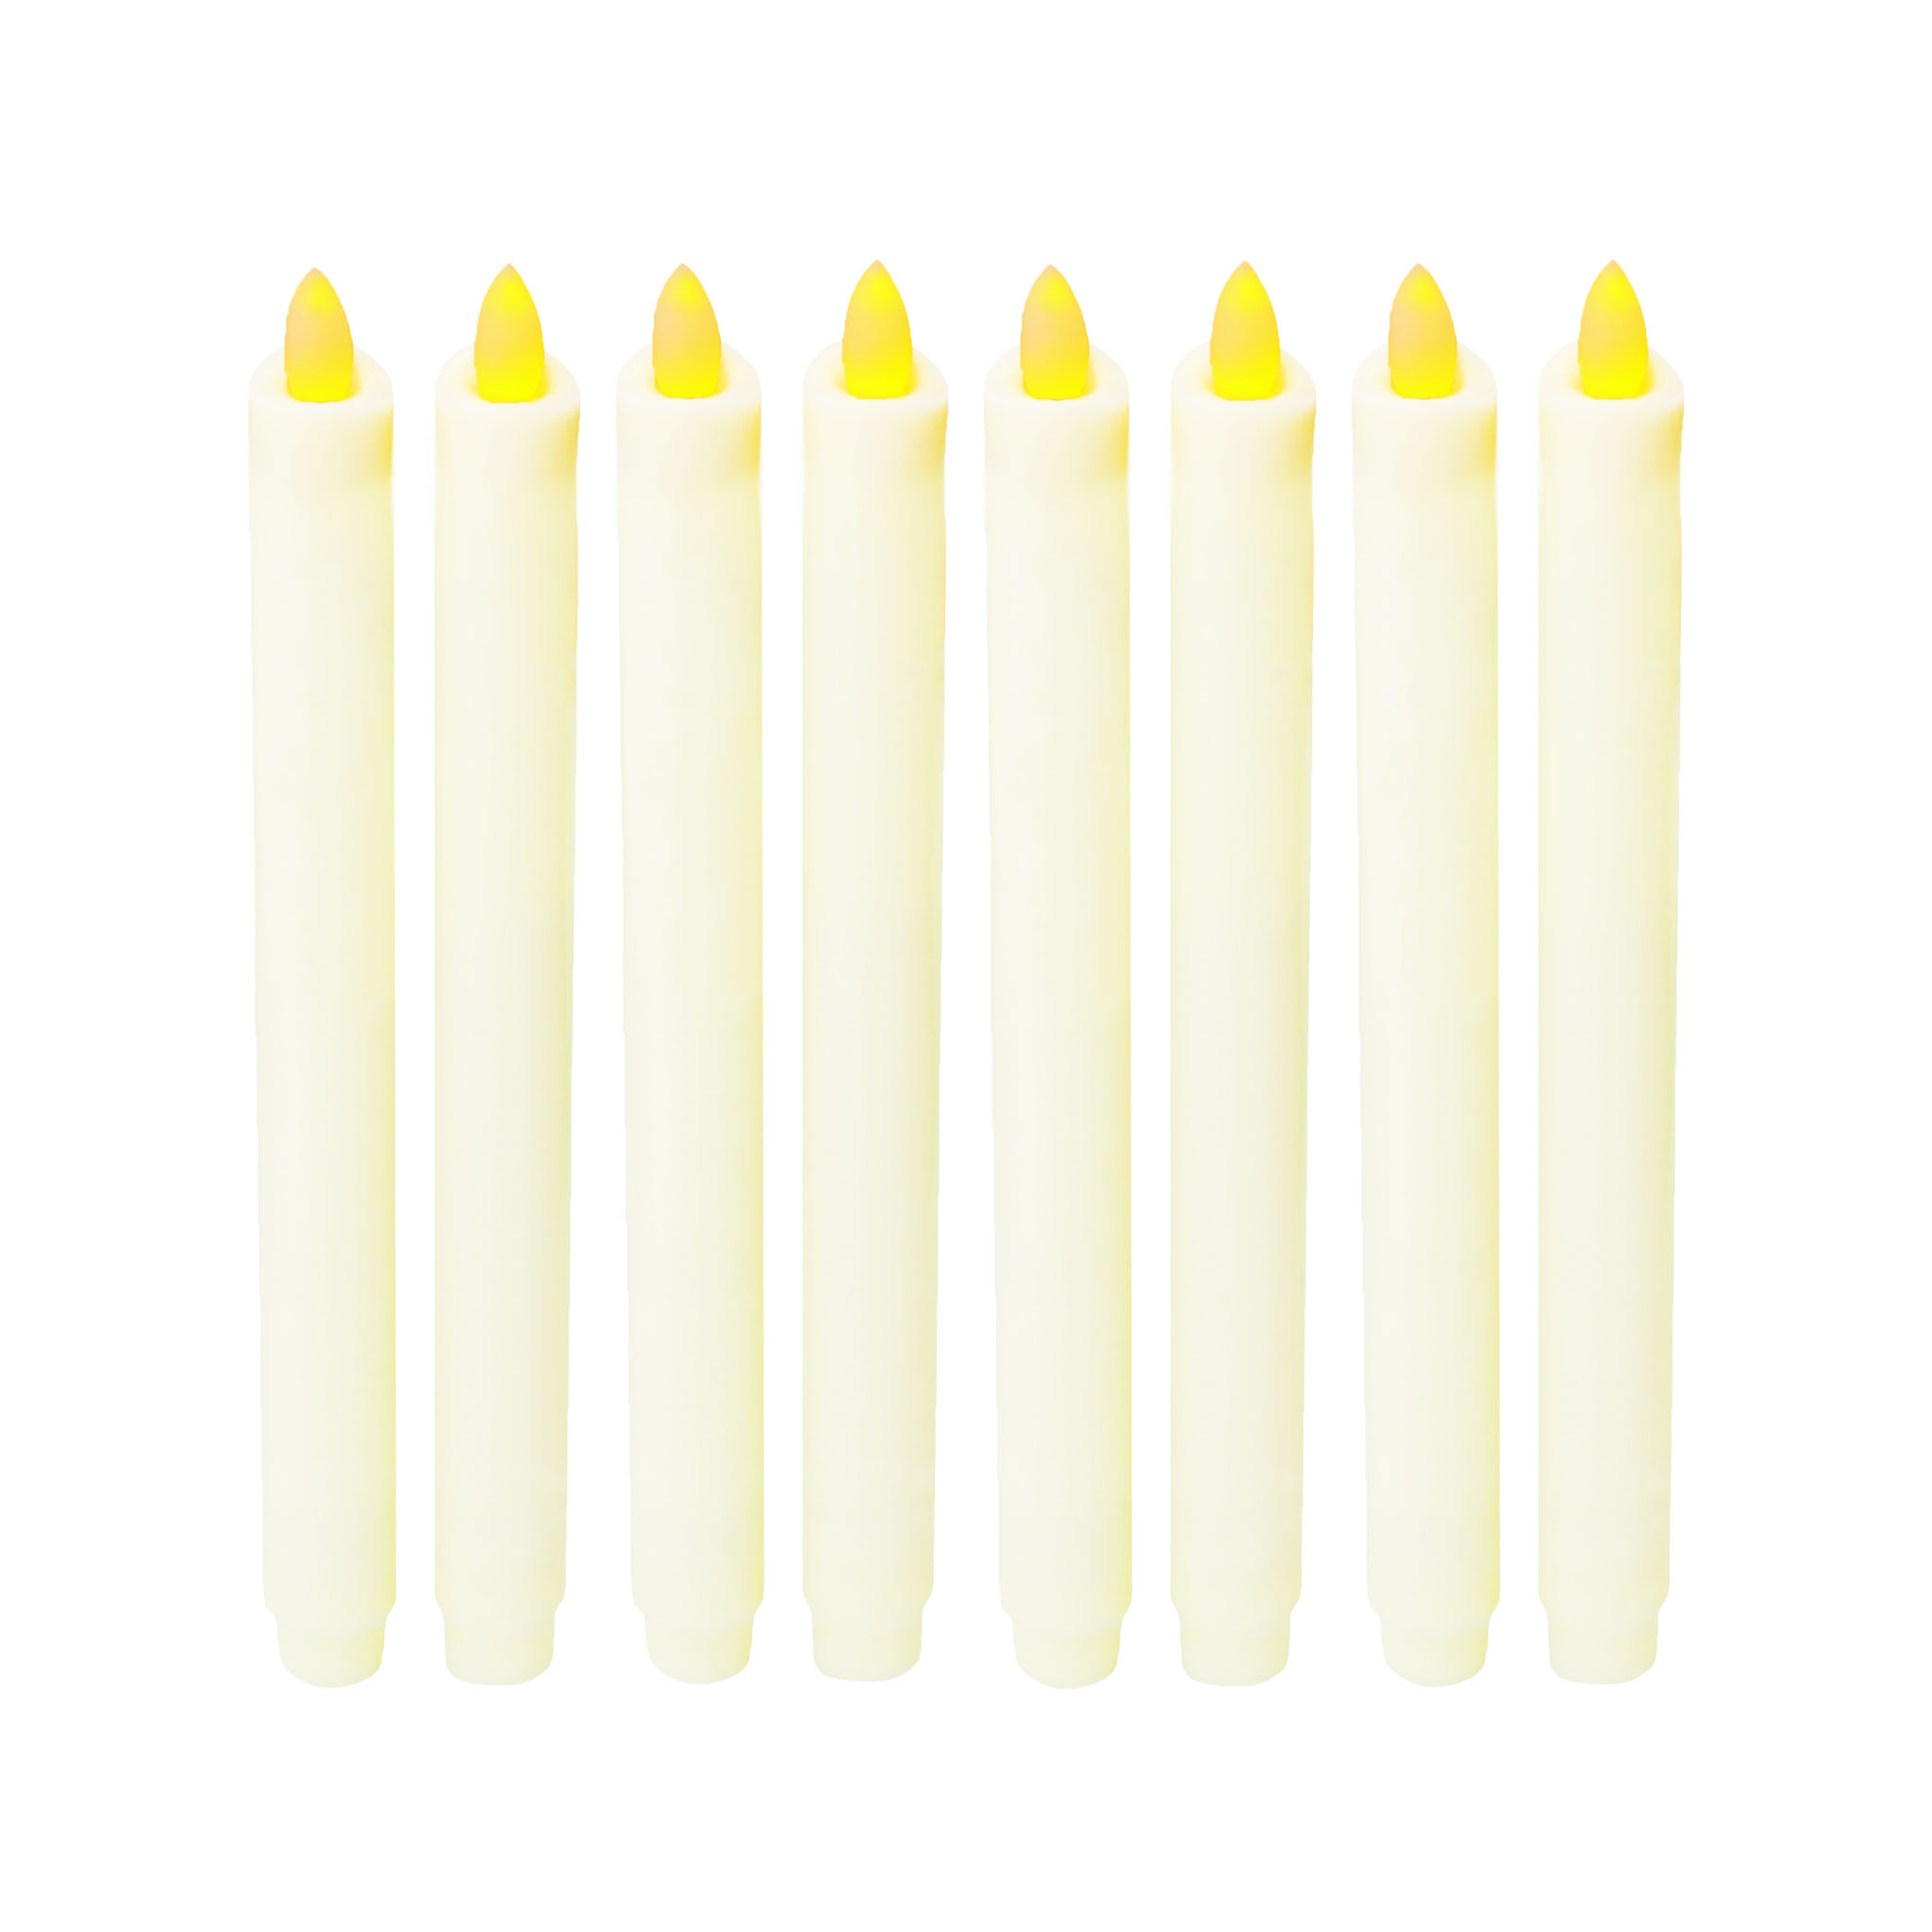 8 Real Wax Flameless Battery Operated LED Taper Candles w/ Timer